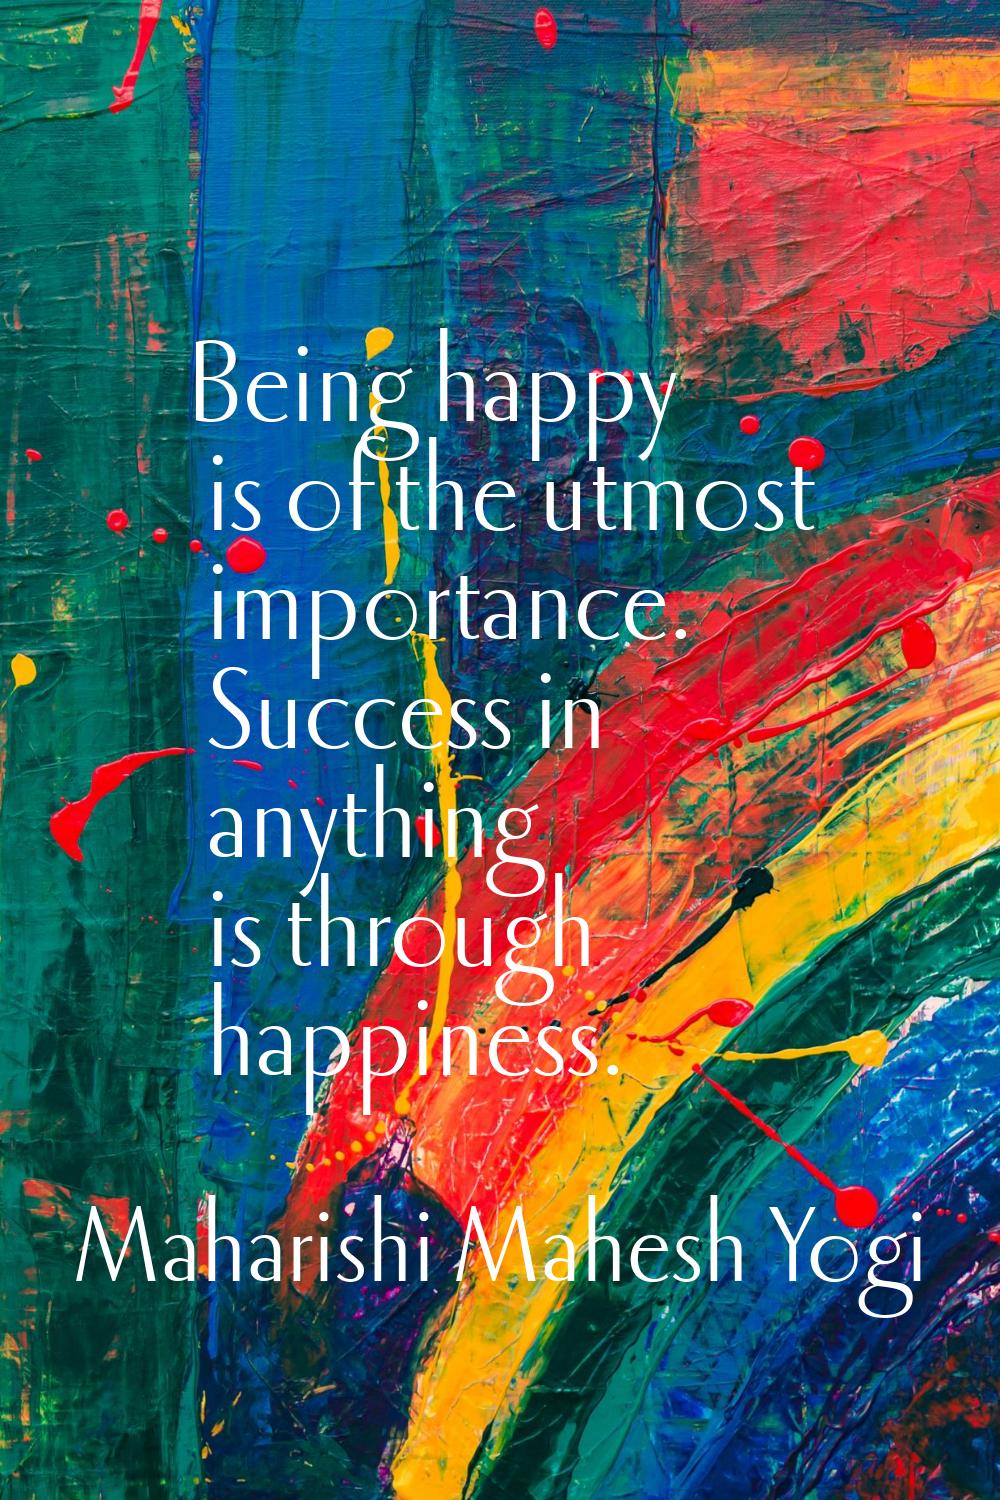 Being happy is of the utmost importance. Success in anything is through happiness.